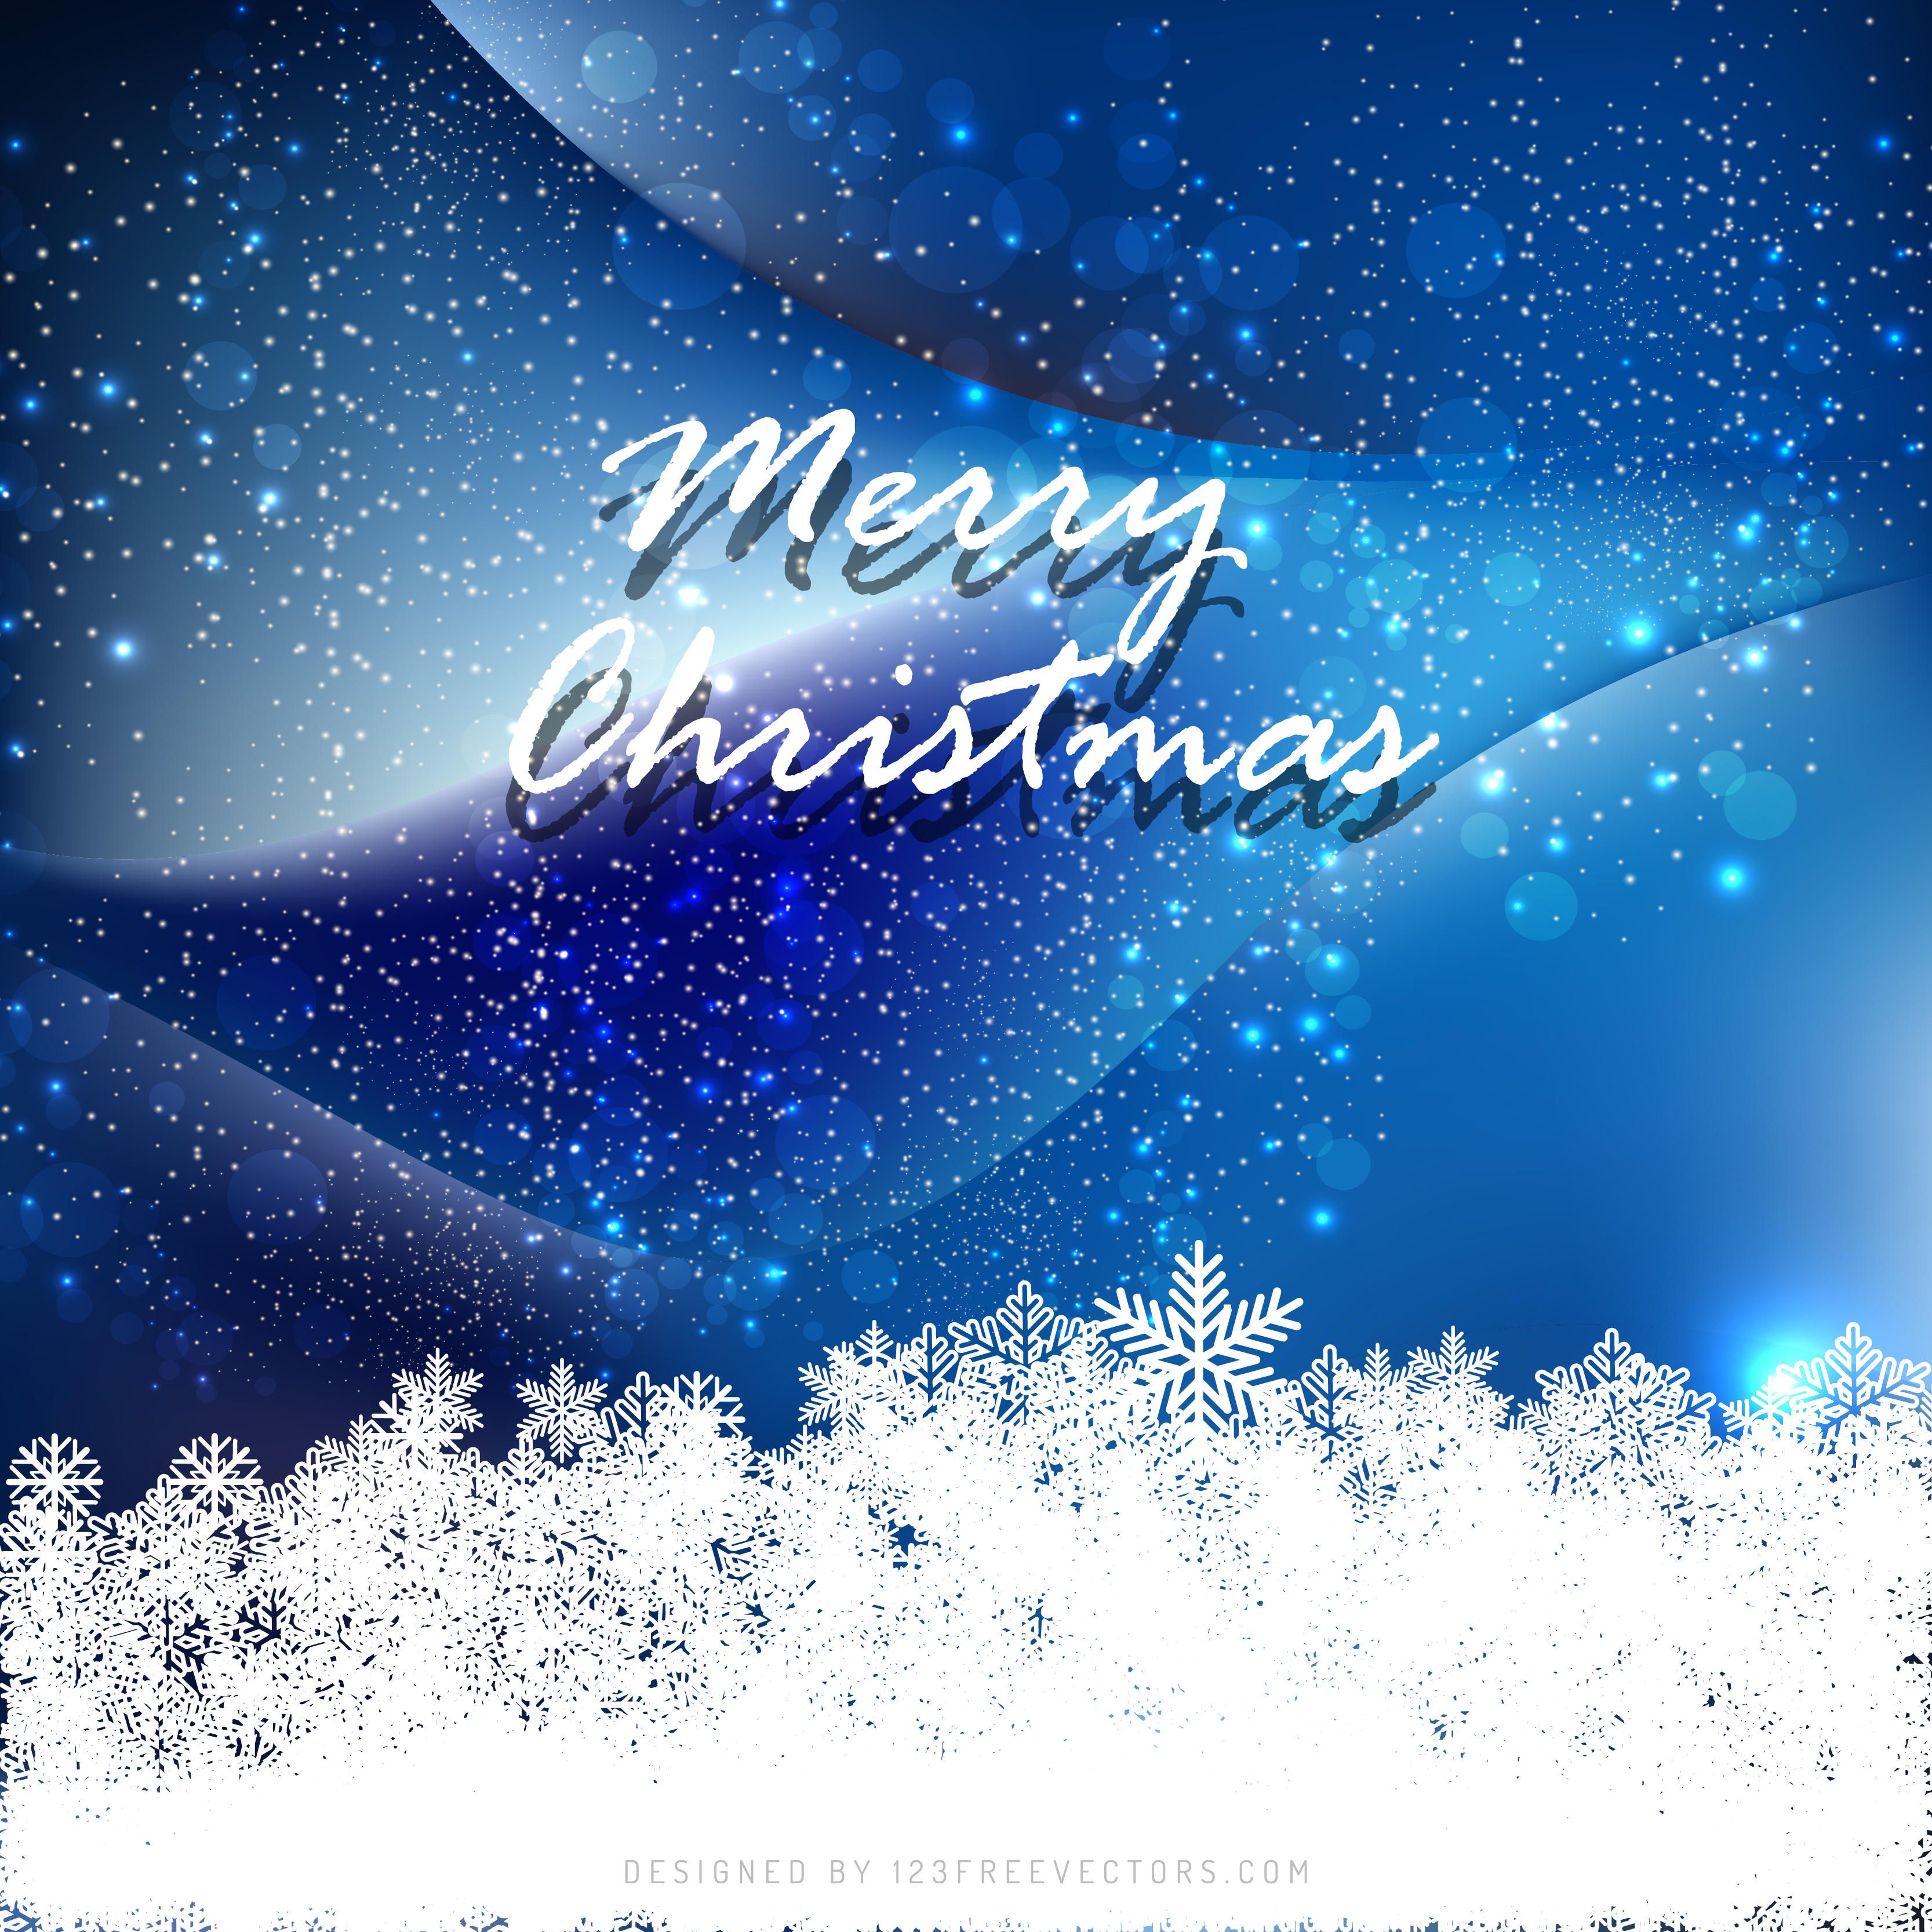 Merry Christmas Navy Blue Background GraphicsFreevectors